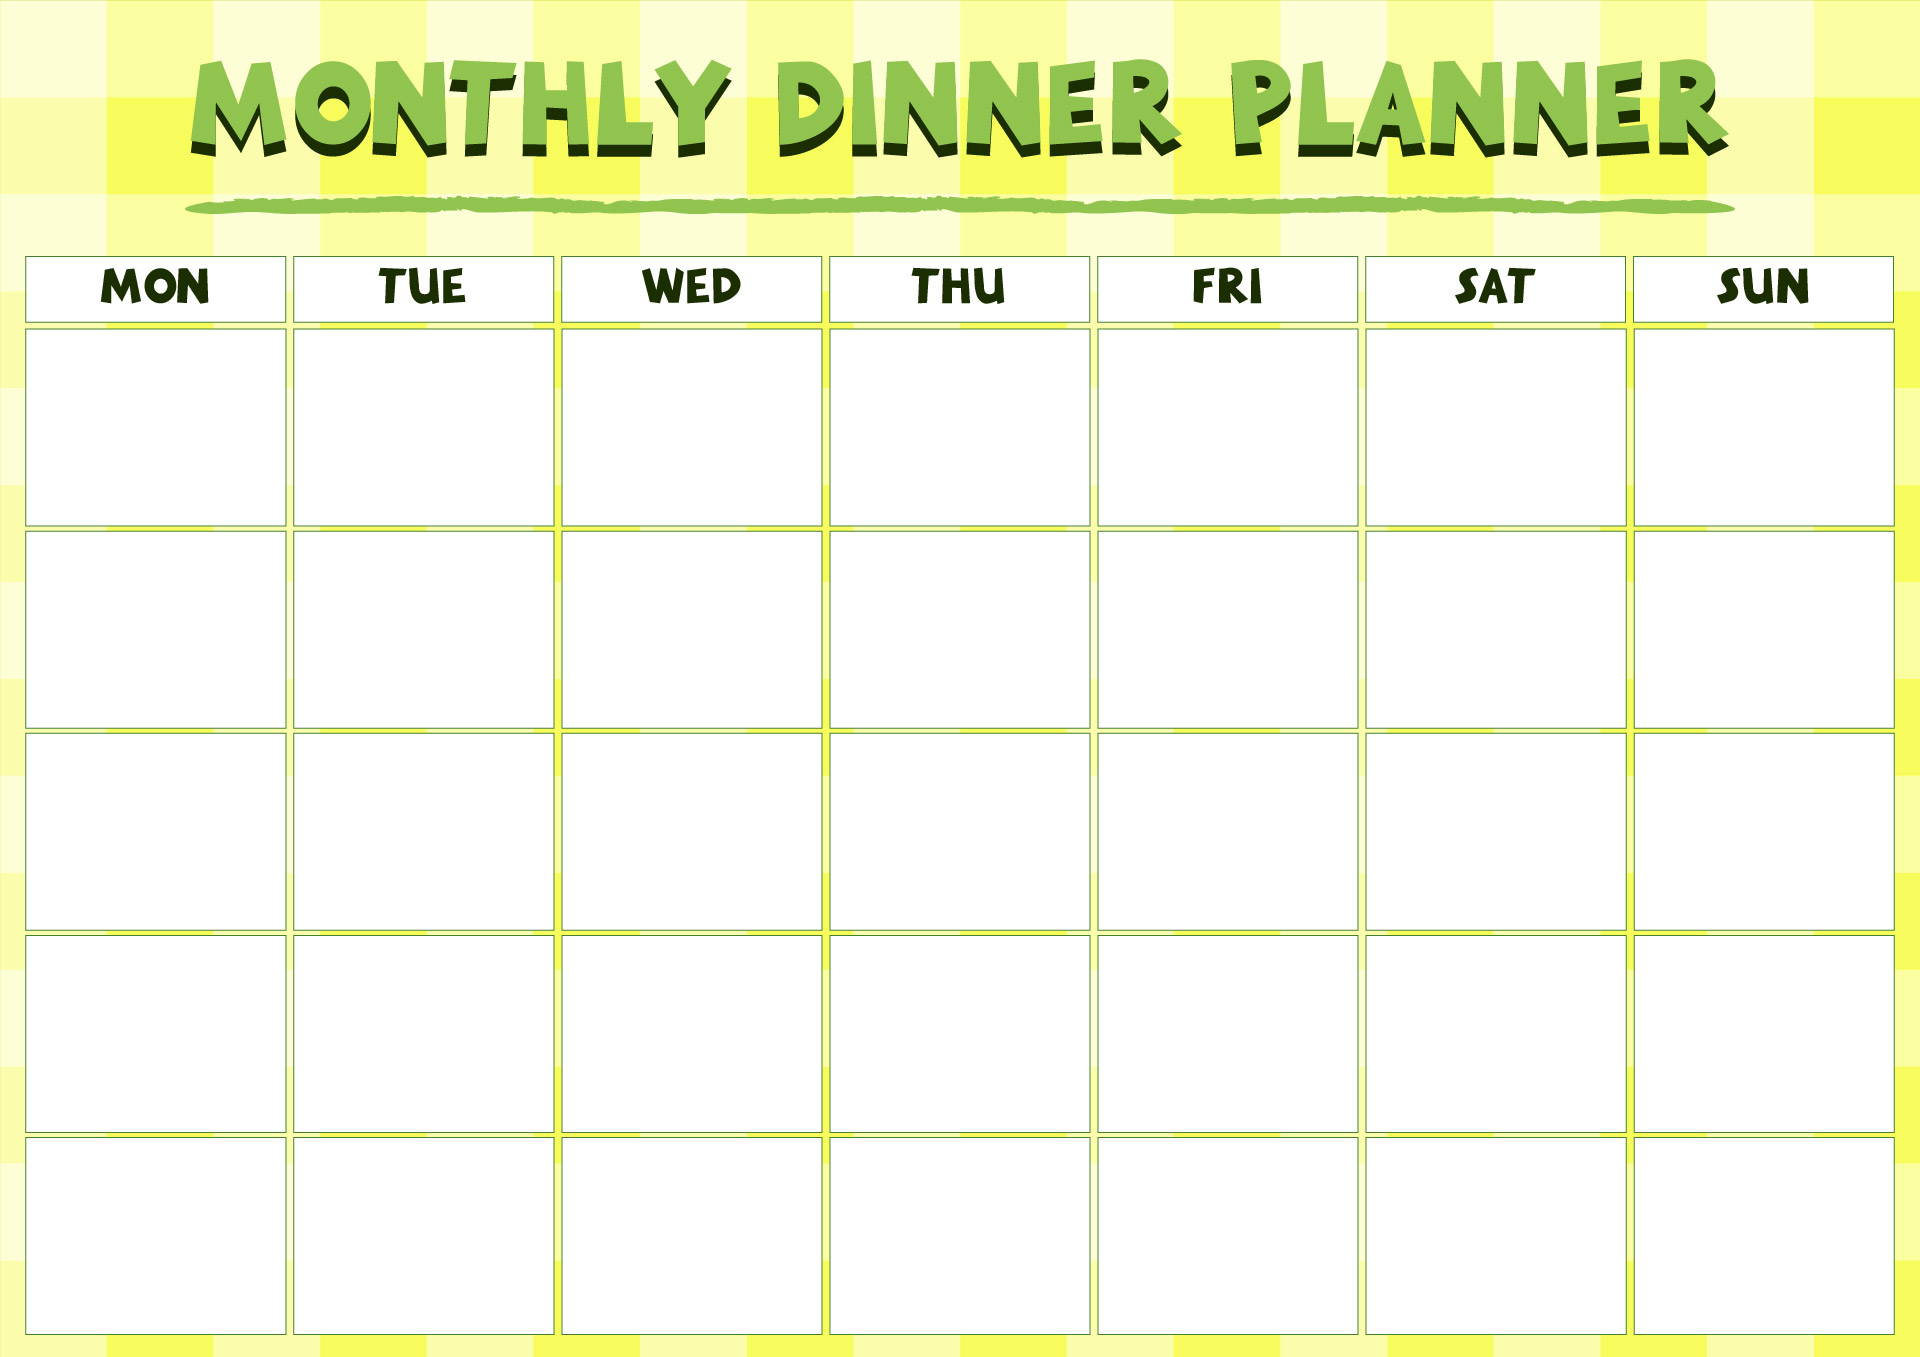 Printable Monthly Meal Plan Template Free Printable Templates